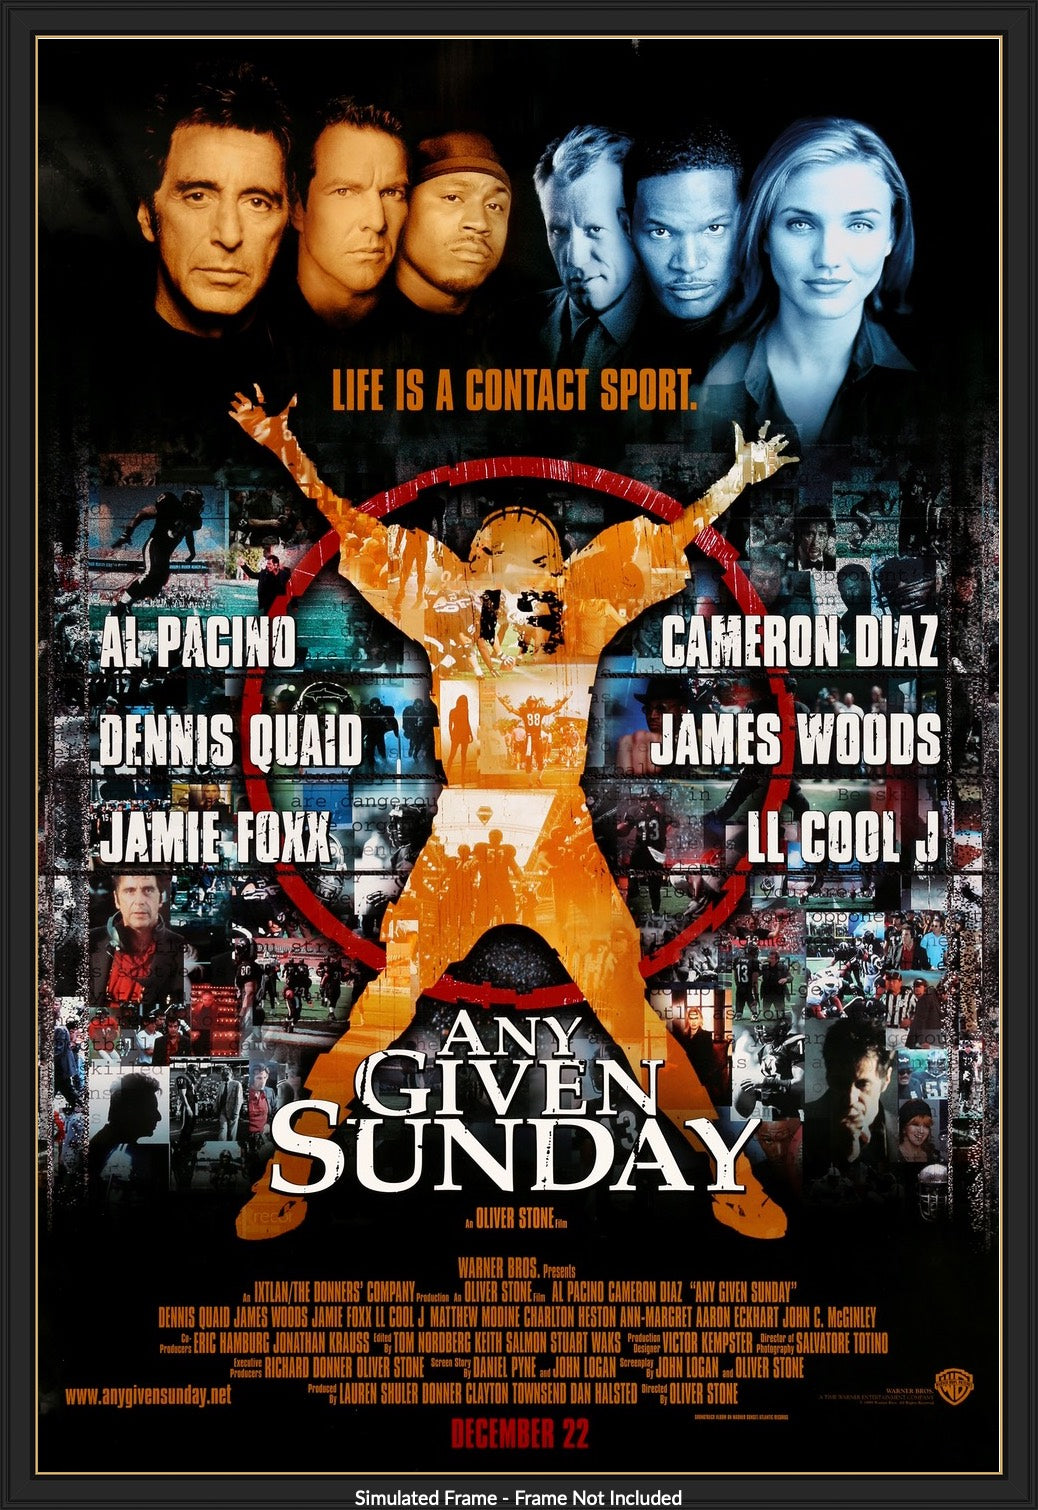 Any Given Sunday (1999) original movie poster for sale at Original Film Art